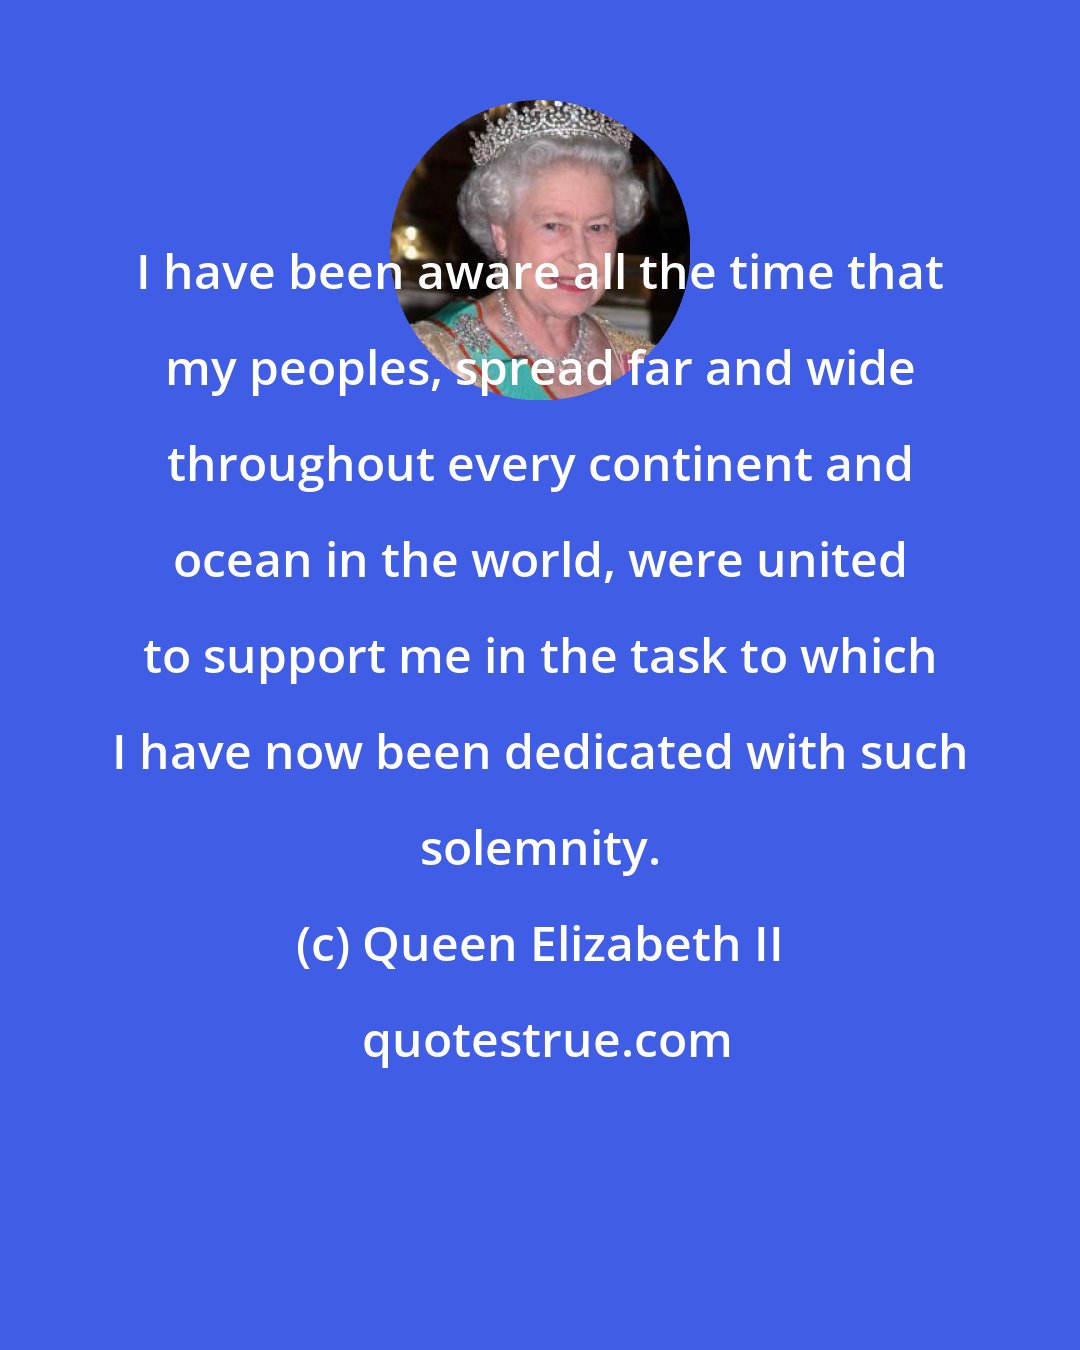 Queen Elizabeth II: I have been aware all the time that my peoples, spread far and wide throughout every continent and ocean in the world, were united to support me in the task to which I have now been dedicated with such solemnity.